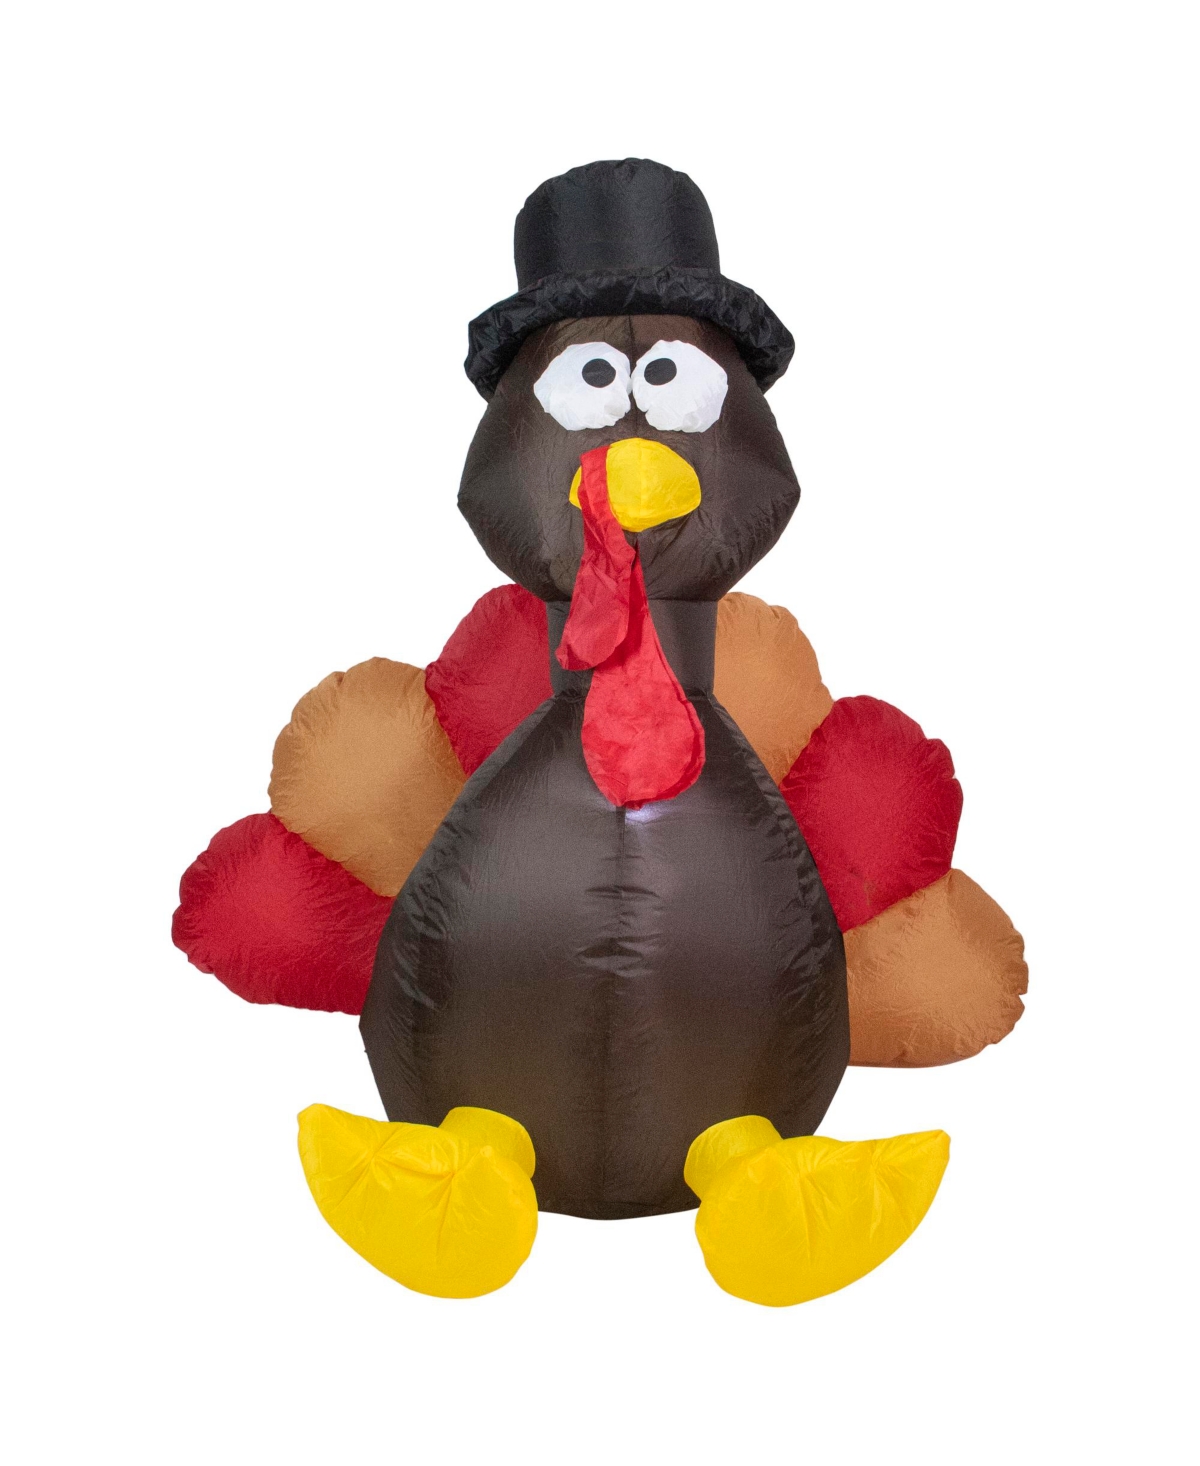 Inflatable Lighted Thanksgiving Turkey Outdoor Decor, 6' - Brown